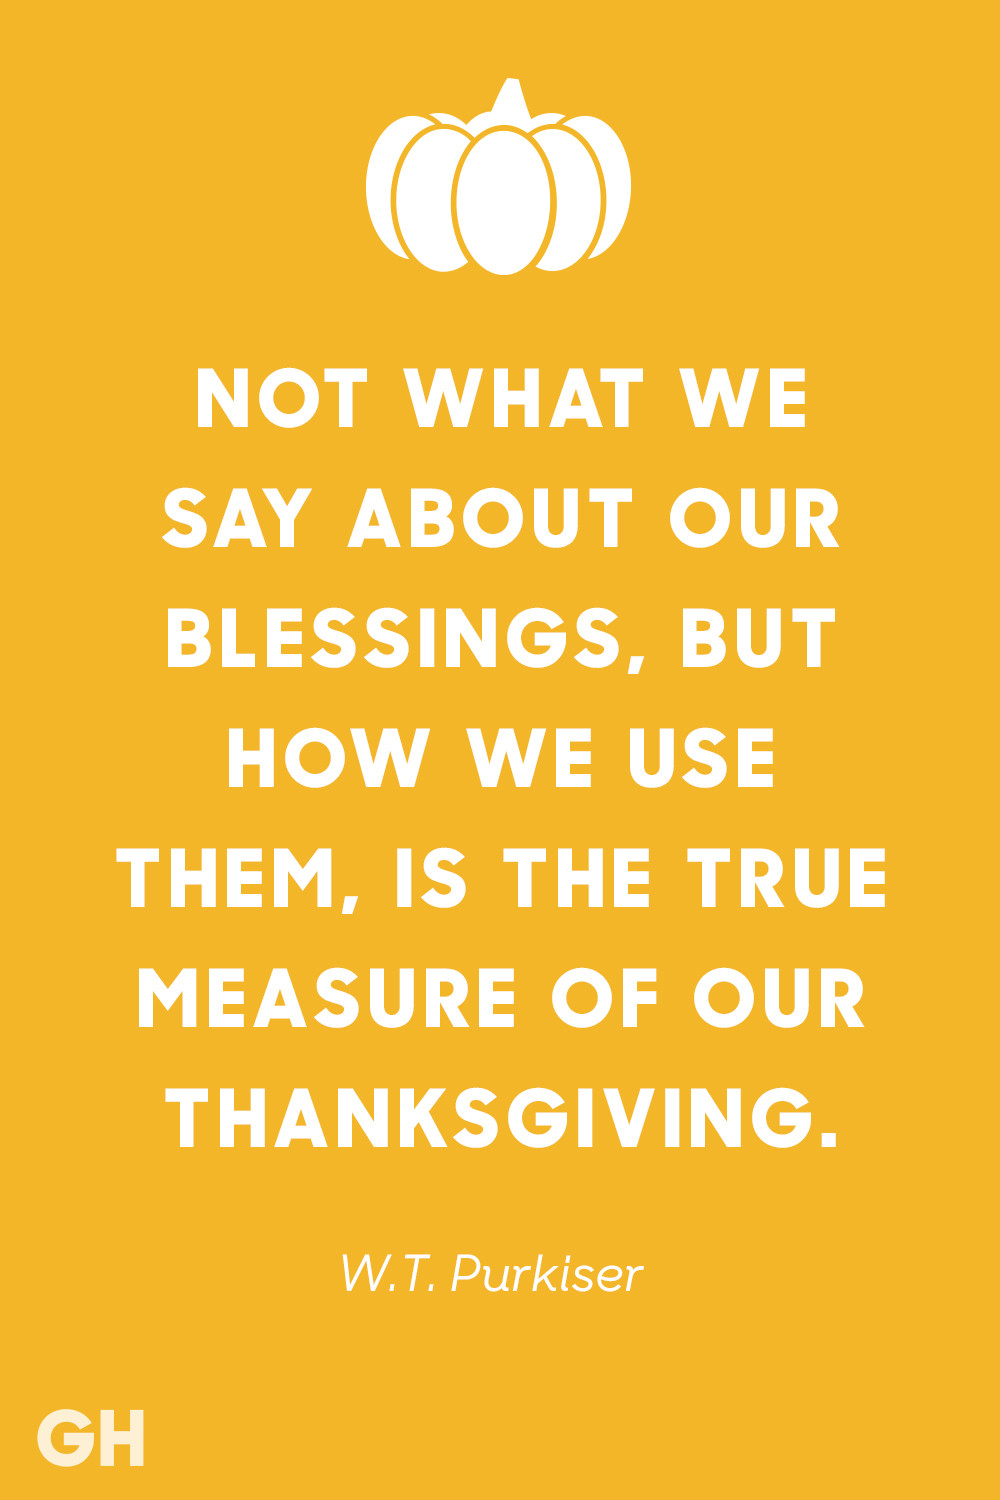 Friends Thanksgiving Quote
 15 Best Thanksgiving Quotes Inspirational and Funny